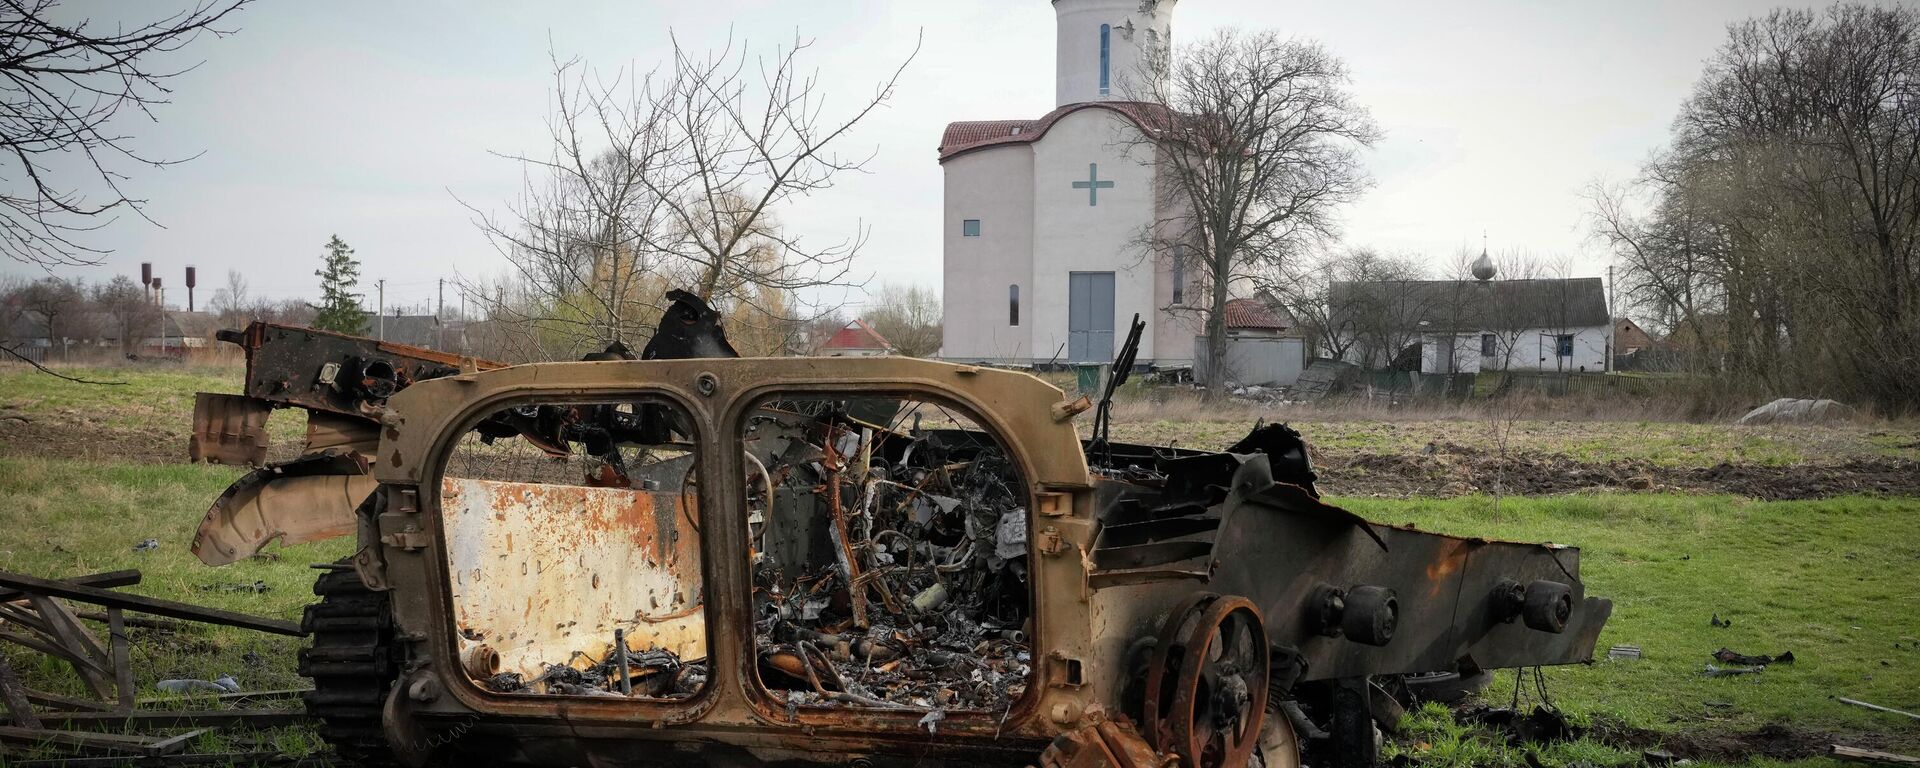 Fragments of a destroyed Russian military vehicle lie against the background of an Orthodox church in the village of Lypivka close to Kiev, Ukraine, on April 11, 2022.  - Sputnik International, 1920, 15.05.2022